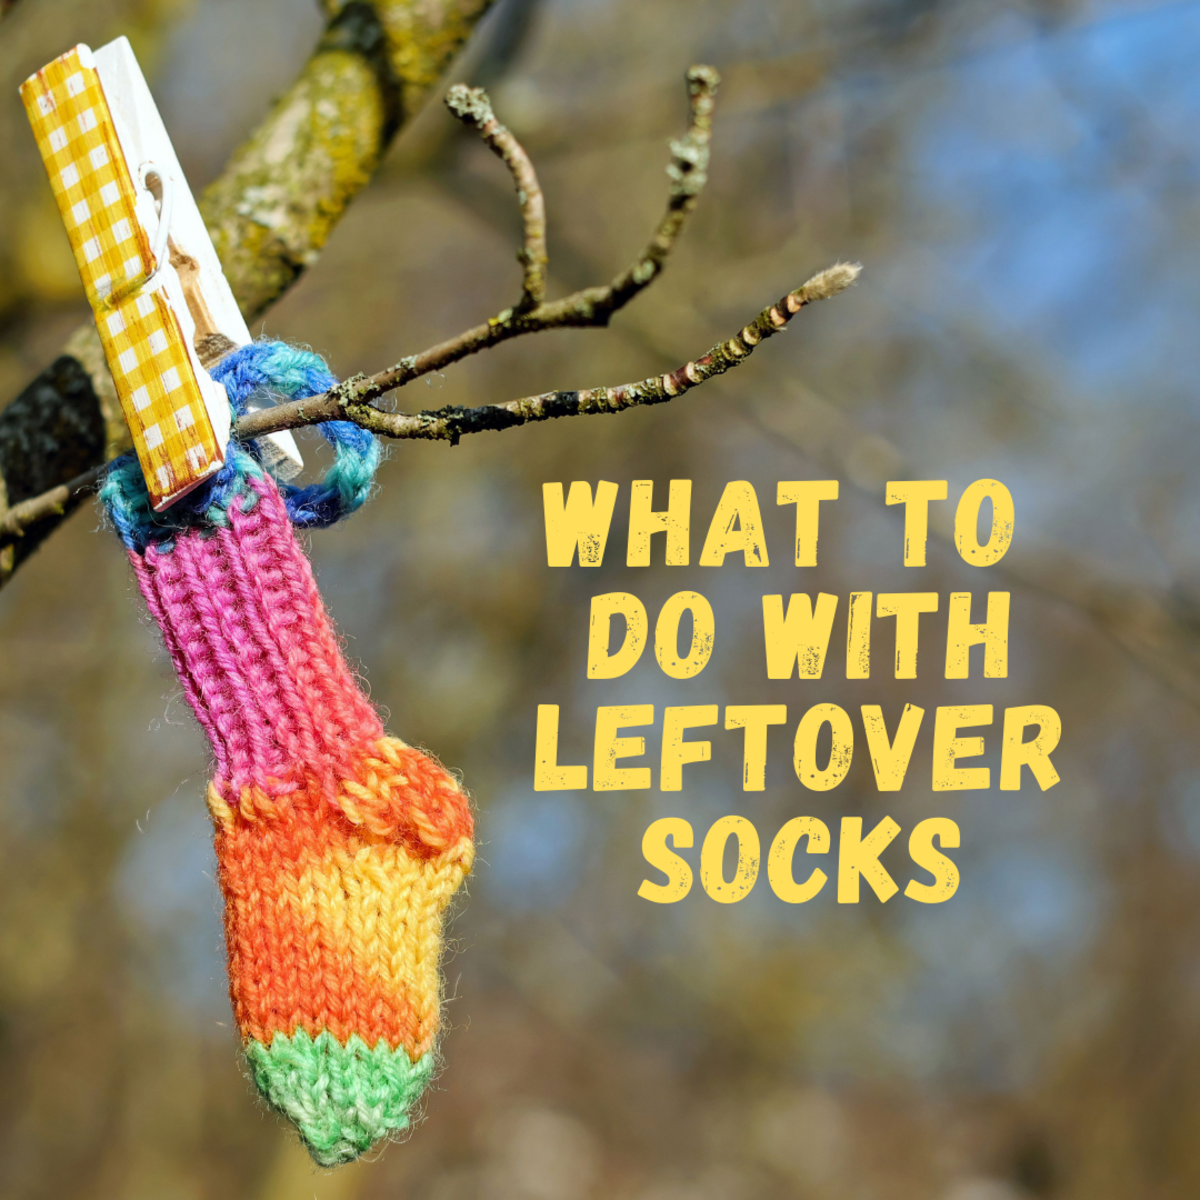 Only have one sock? Here are some crafty ways you can deal with leftover or lost socks!